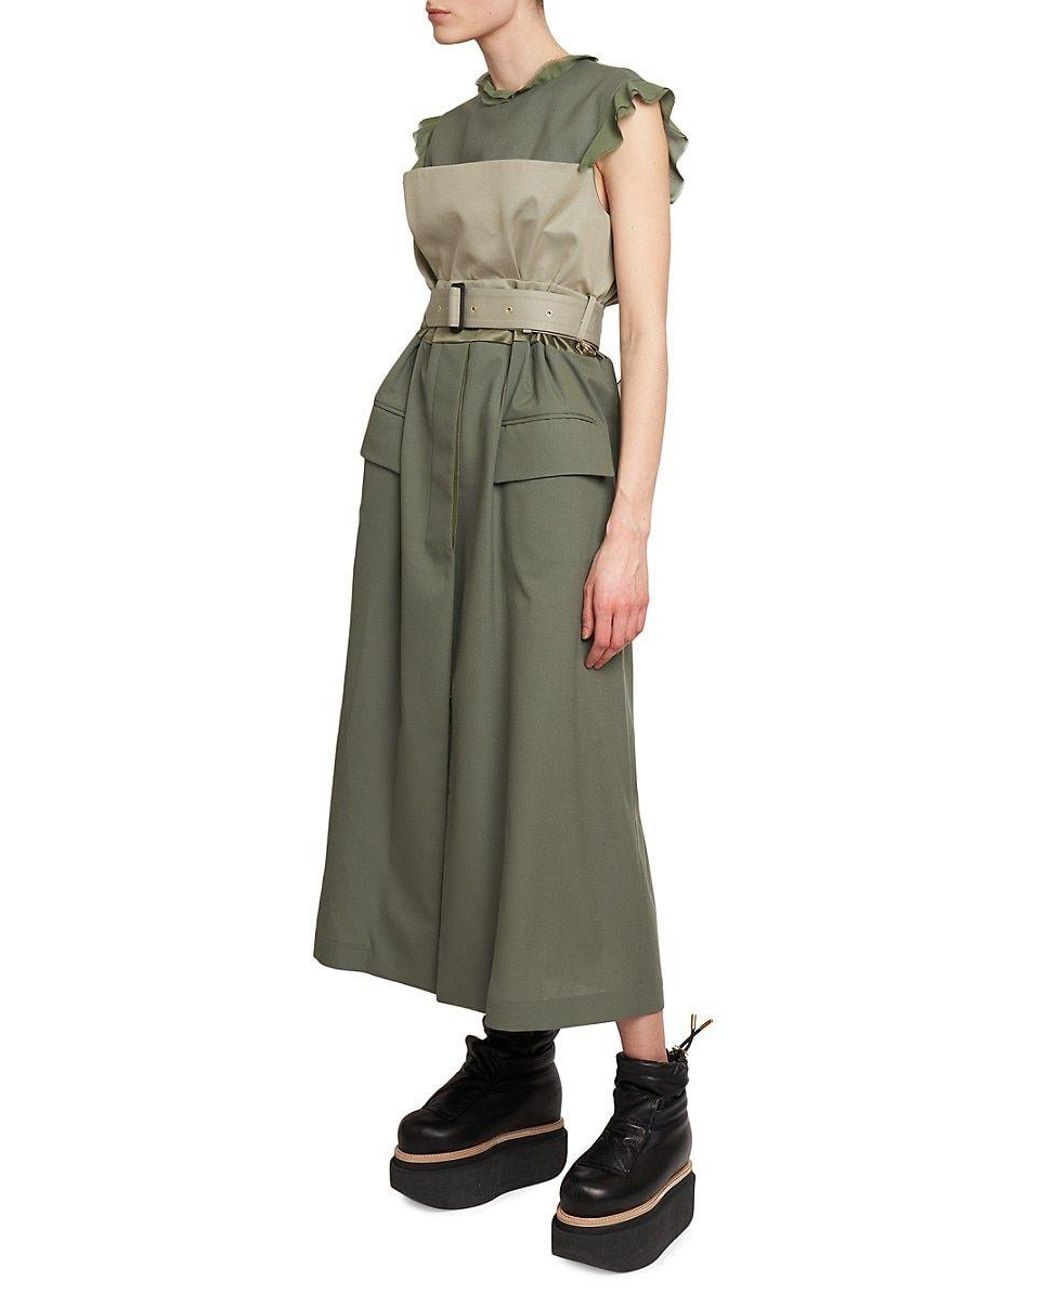 Sacai Suiting Mix Maxi Dress in Green | Lyst